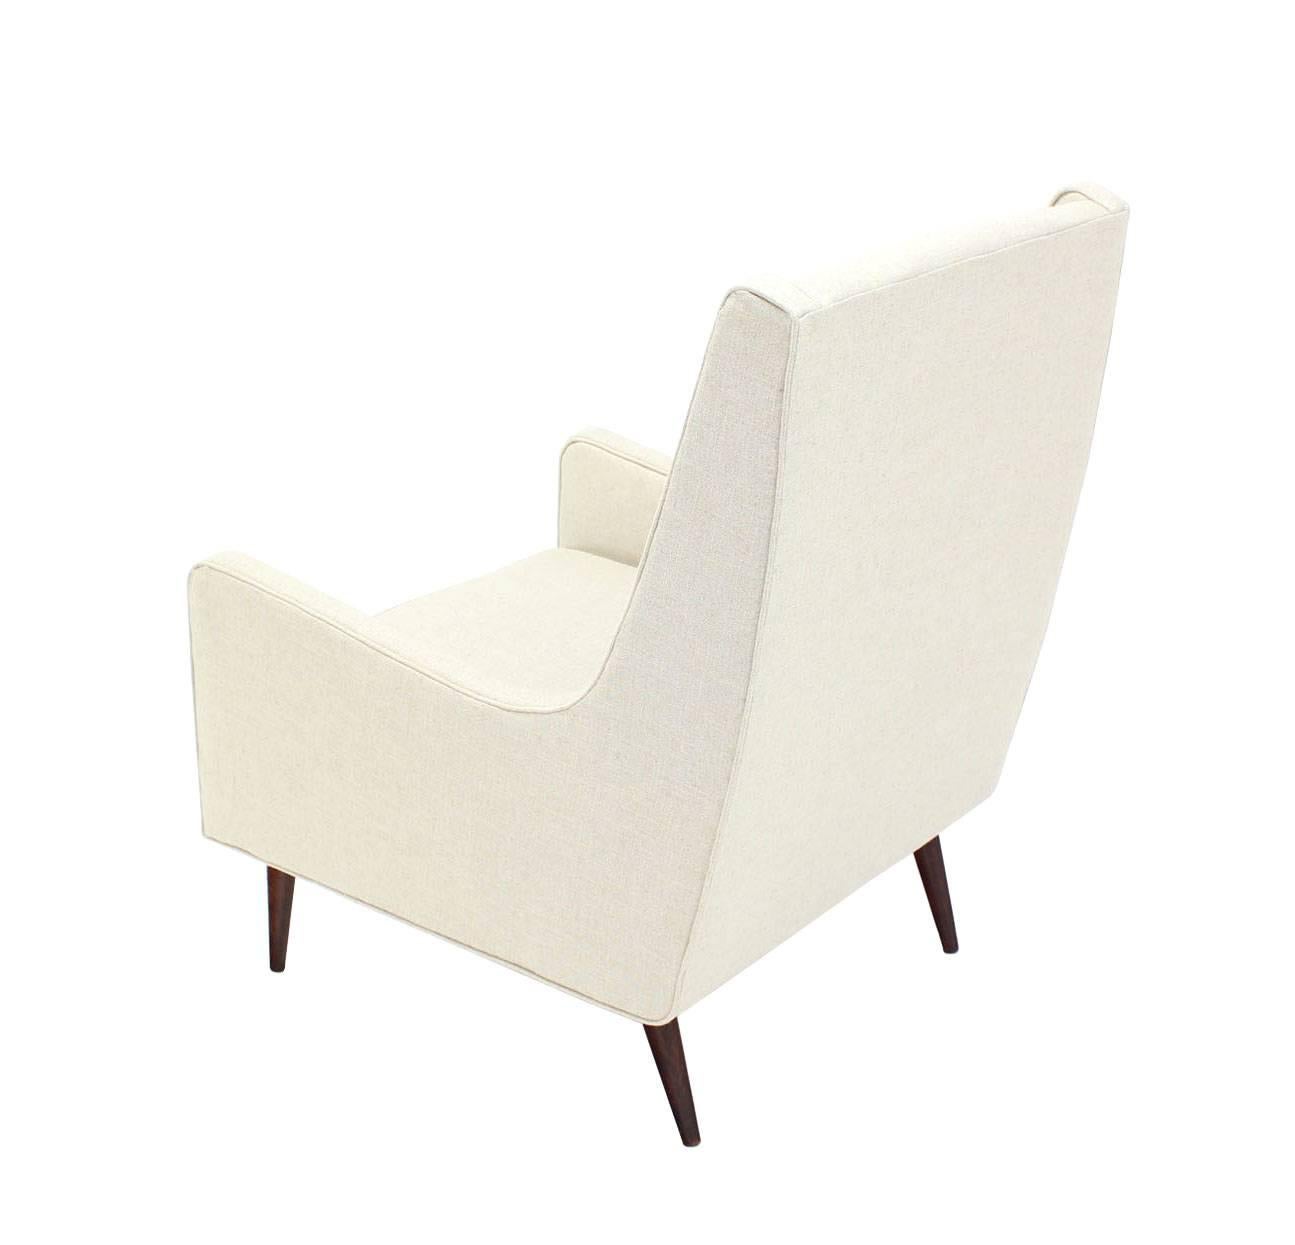 20th Century New White Linen Upholstery Mid-Century Modern Lounge Chair For Sale